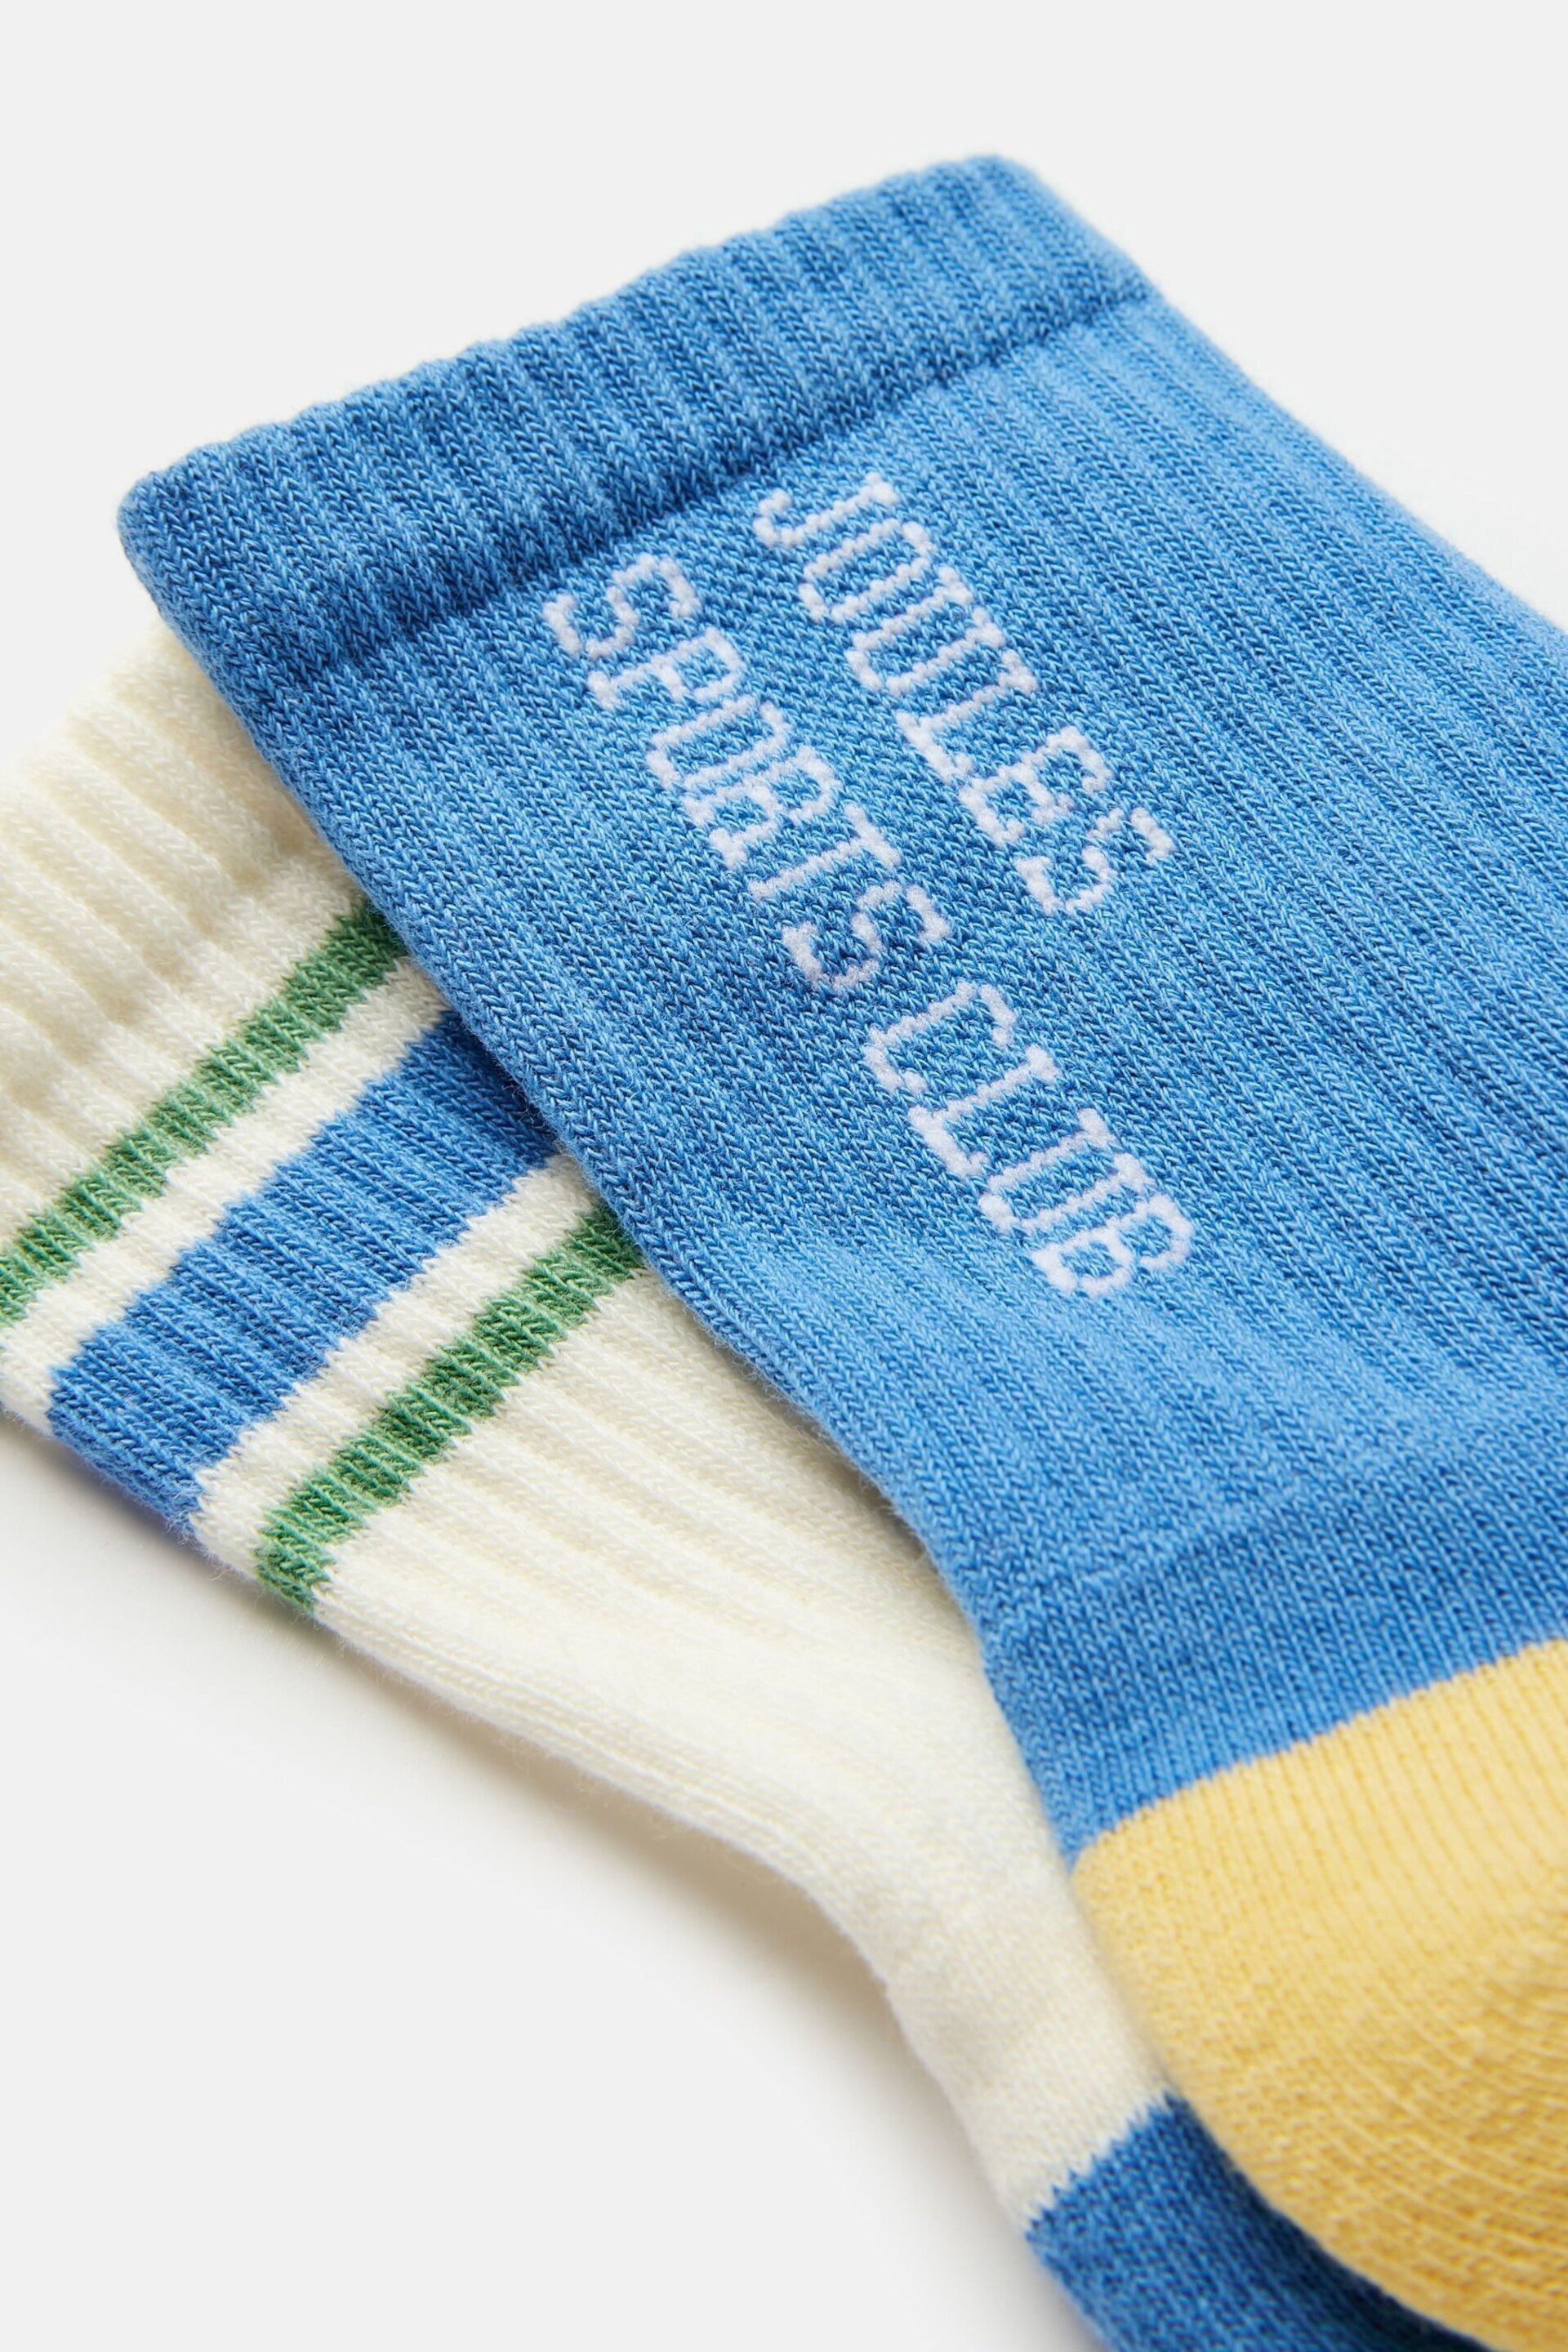 Joules Boys' Volley Blue Tennis Ankle Socks (2 Pack) - Image 2 of 3